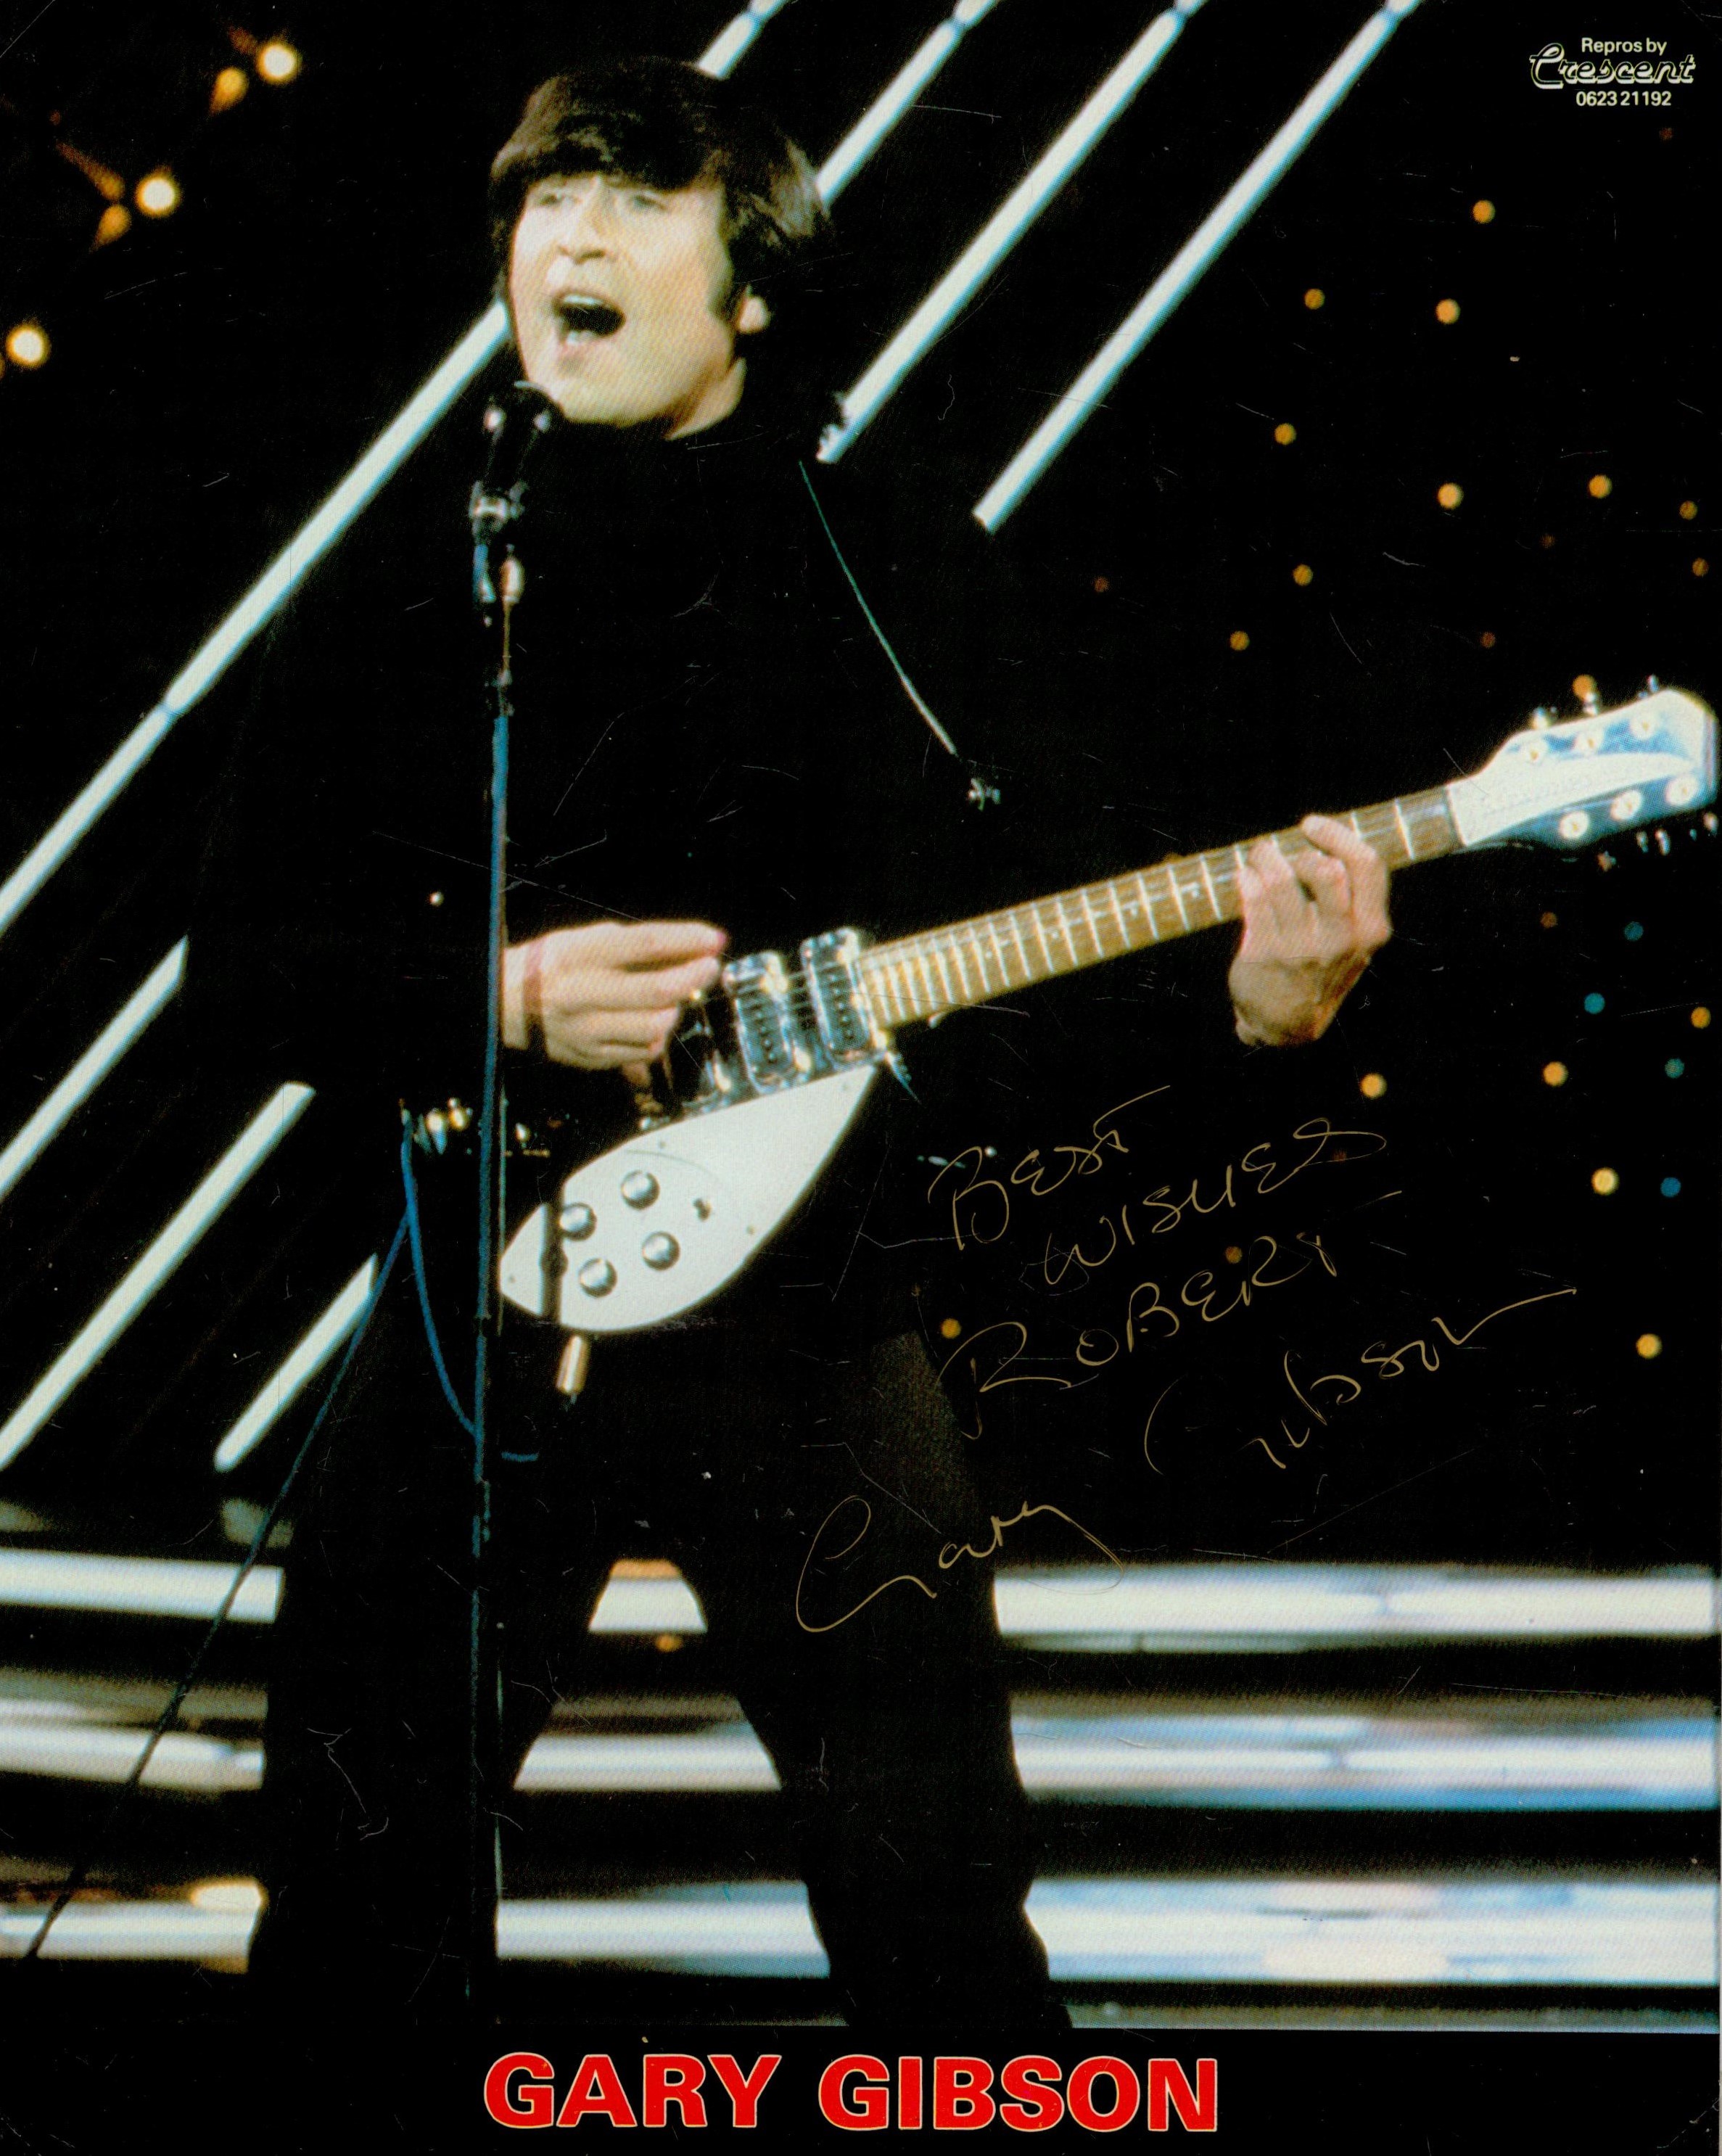 Gary Gibson signed 10x8 inch colour magazine photo. Dedicated. Music Autograph. Good condition.